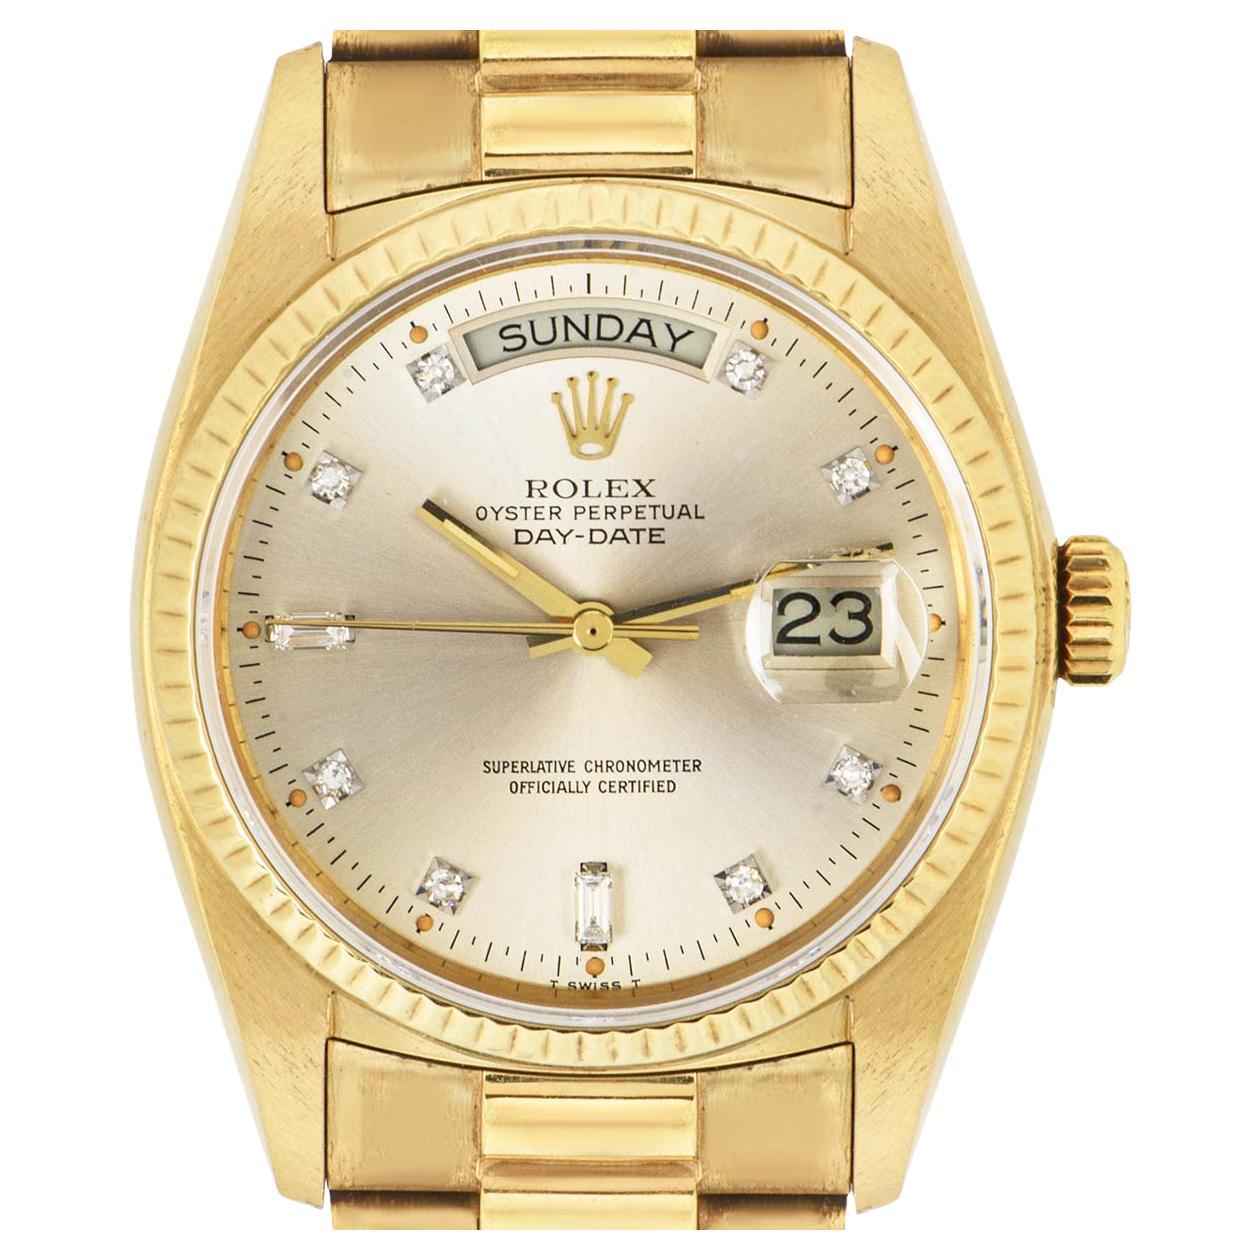 A yellow gold NOS Day-Date by Rolex. Featuring a champagne dial set with 8 round brilliant cut diamond hour markers, 2 baguette cut diamond hour markers and a fixed yellow gold fluted bezel.

Equipped with a yellow gold president bracelet and a